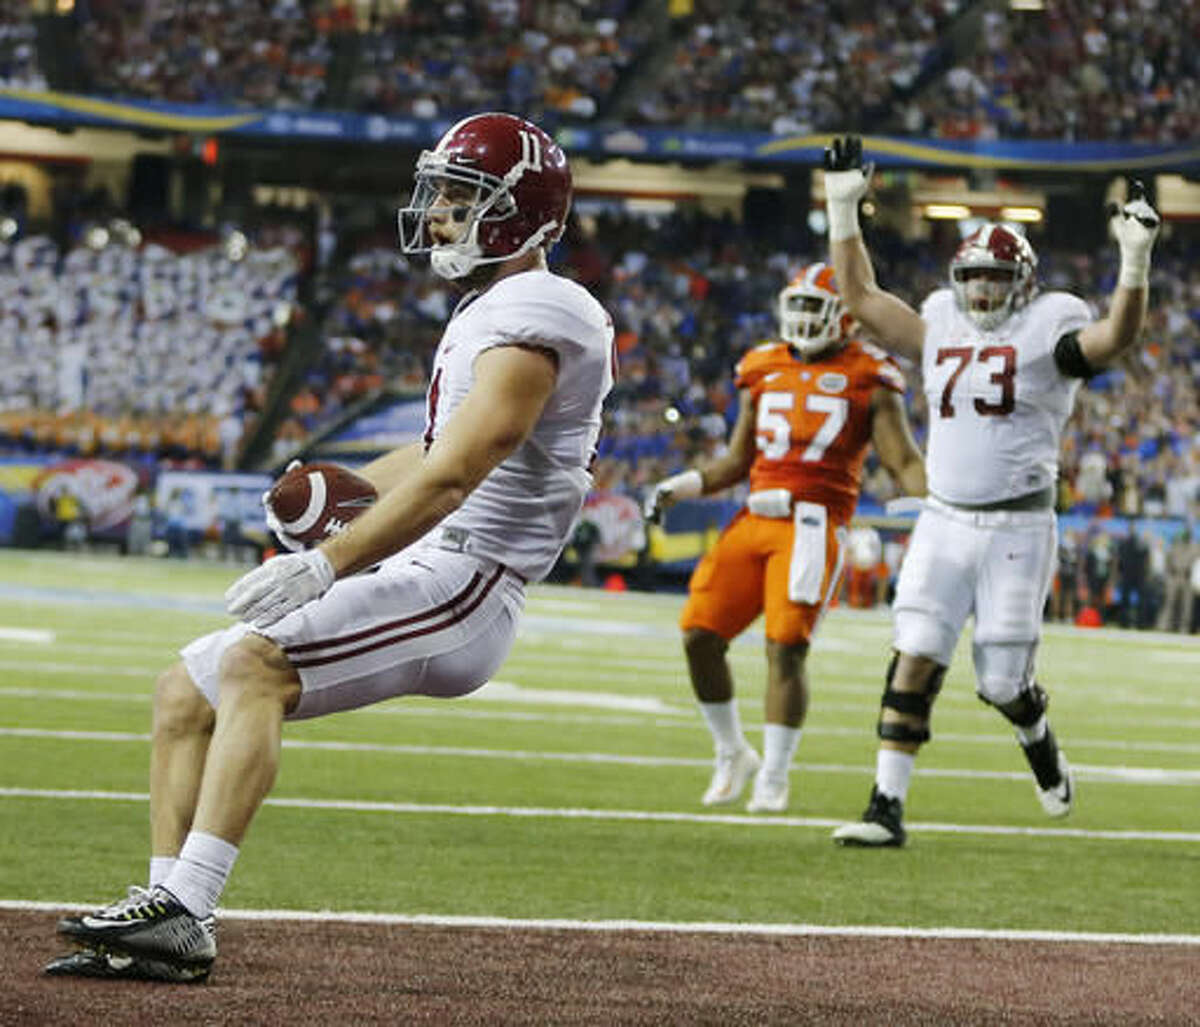 Alabama wide receiver Gehrig Dieter (11) runs into the end zone for a touchdown against Florida during the first half of the Southeastern Conference championship NCAA college football game, Saturday, Dec. 3, 2016, in Atlanta.(AP Photo/John Bazemore)